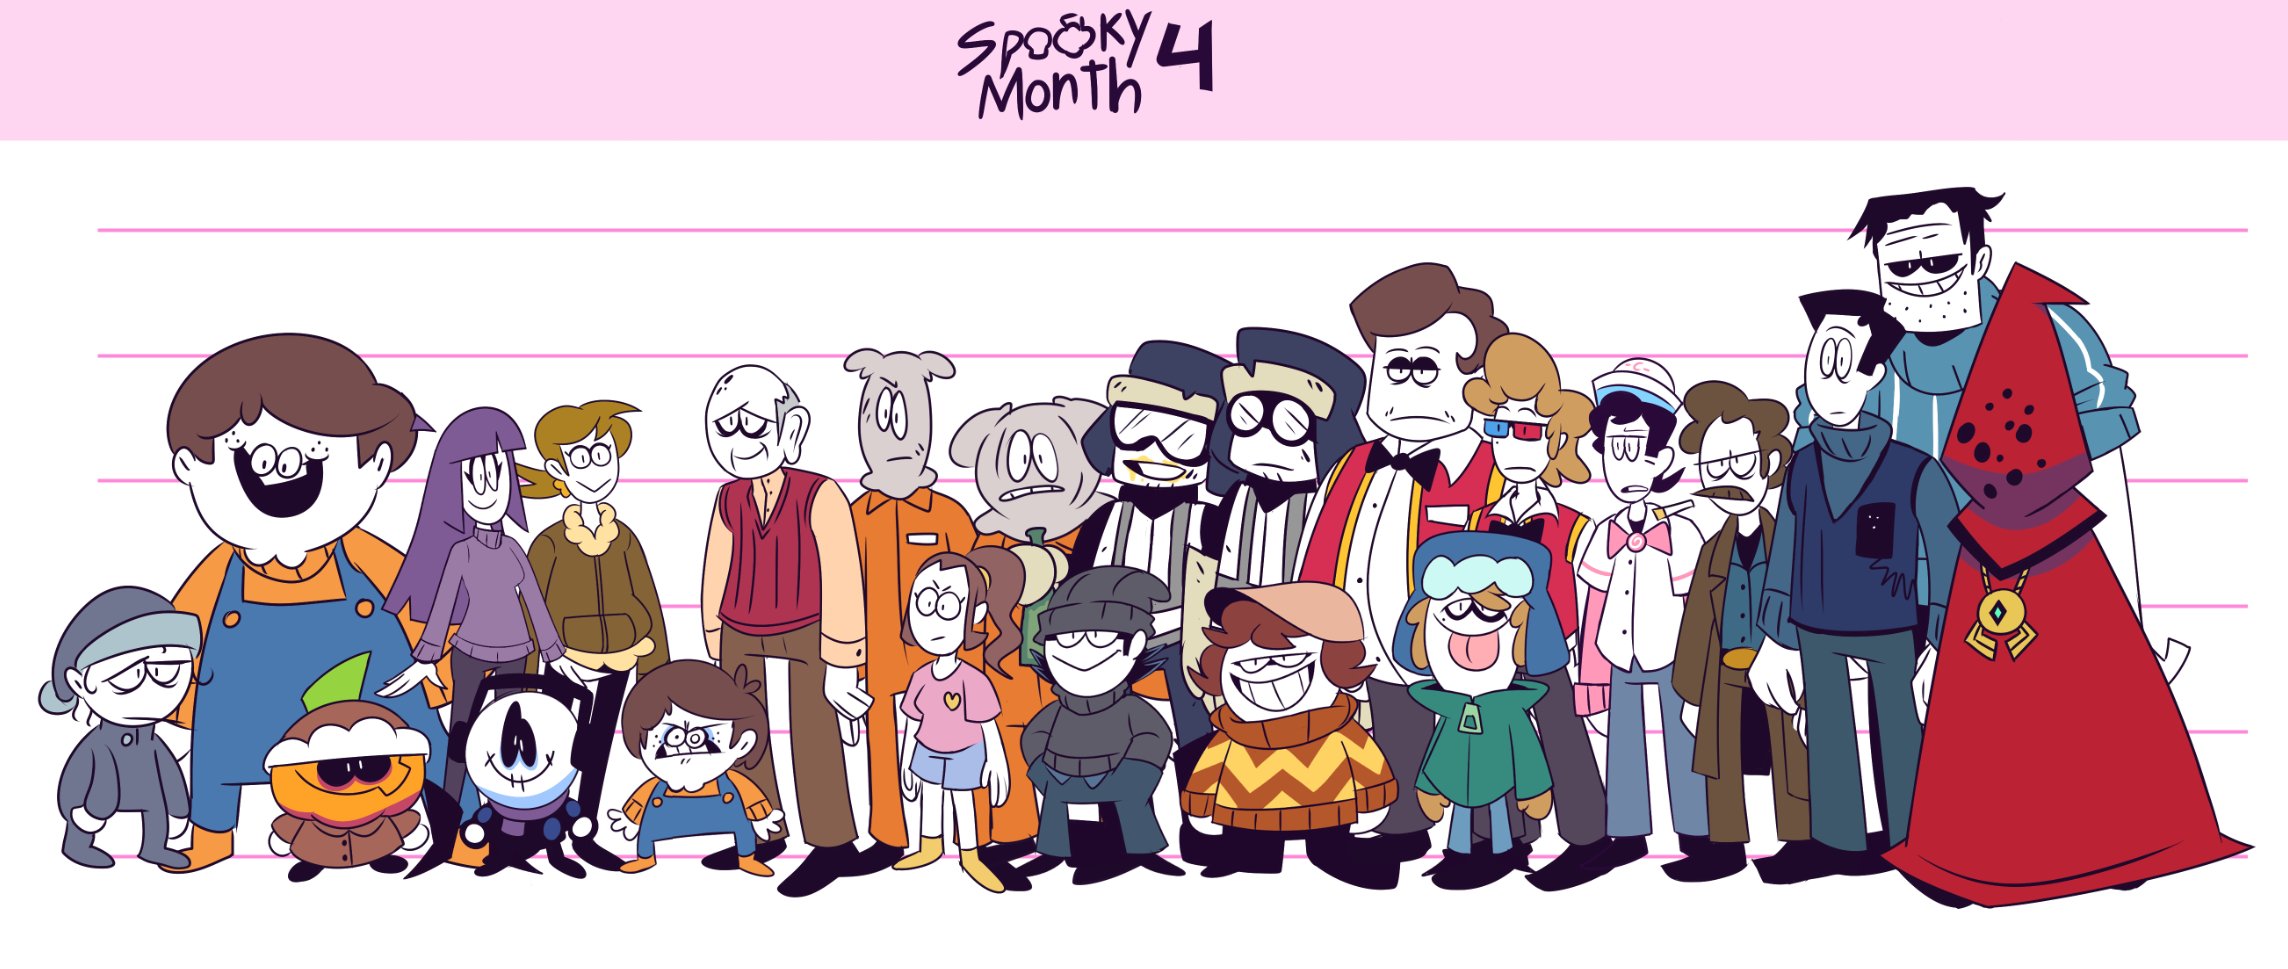 All Spooky Month Episodes Playing At Once V2 (Newgrounds Version